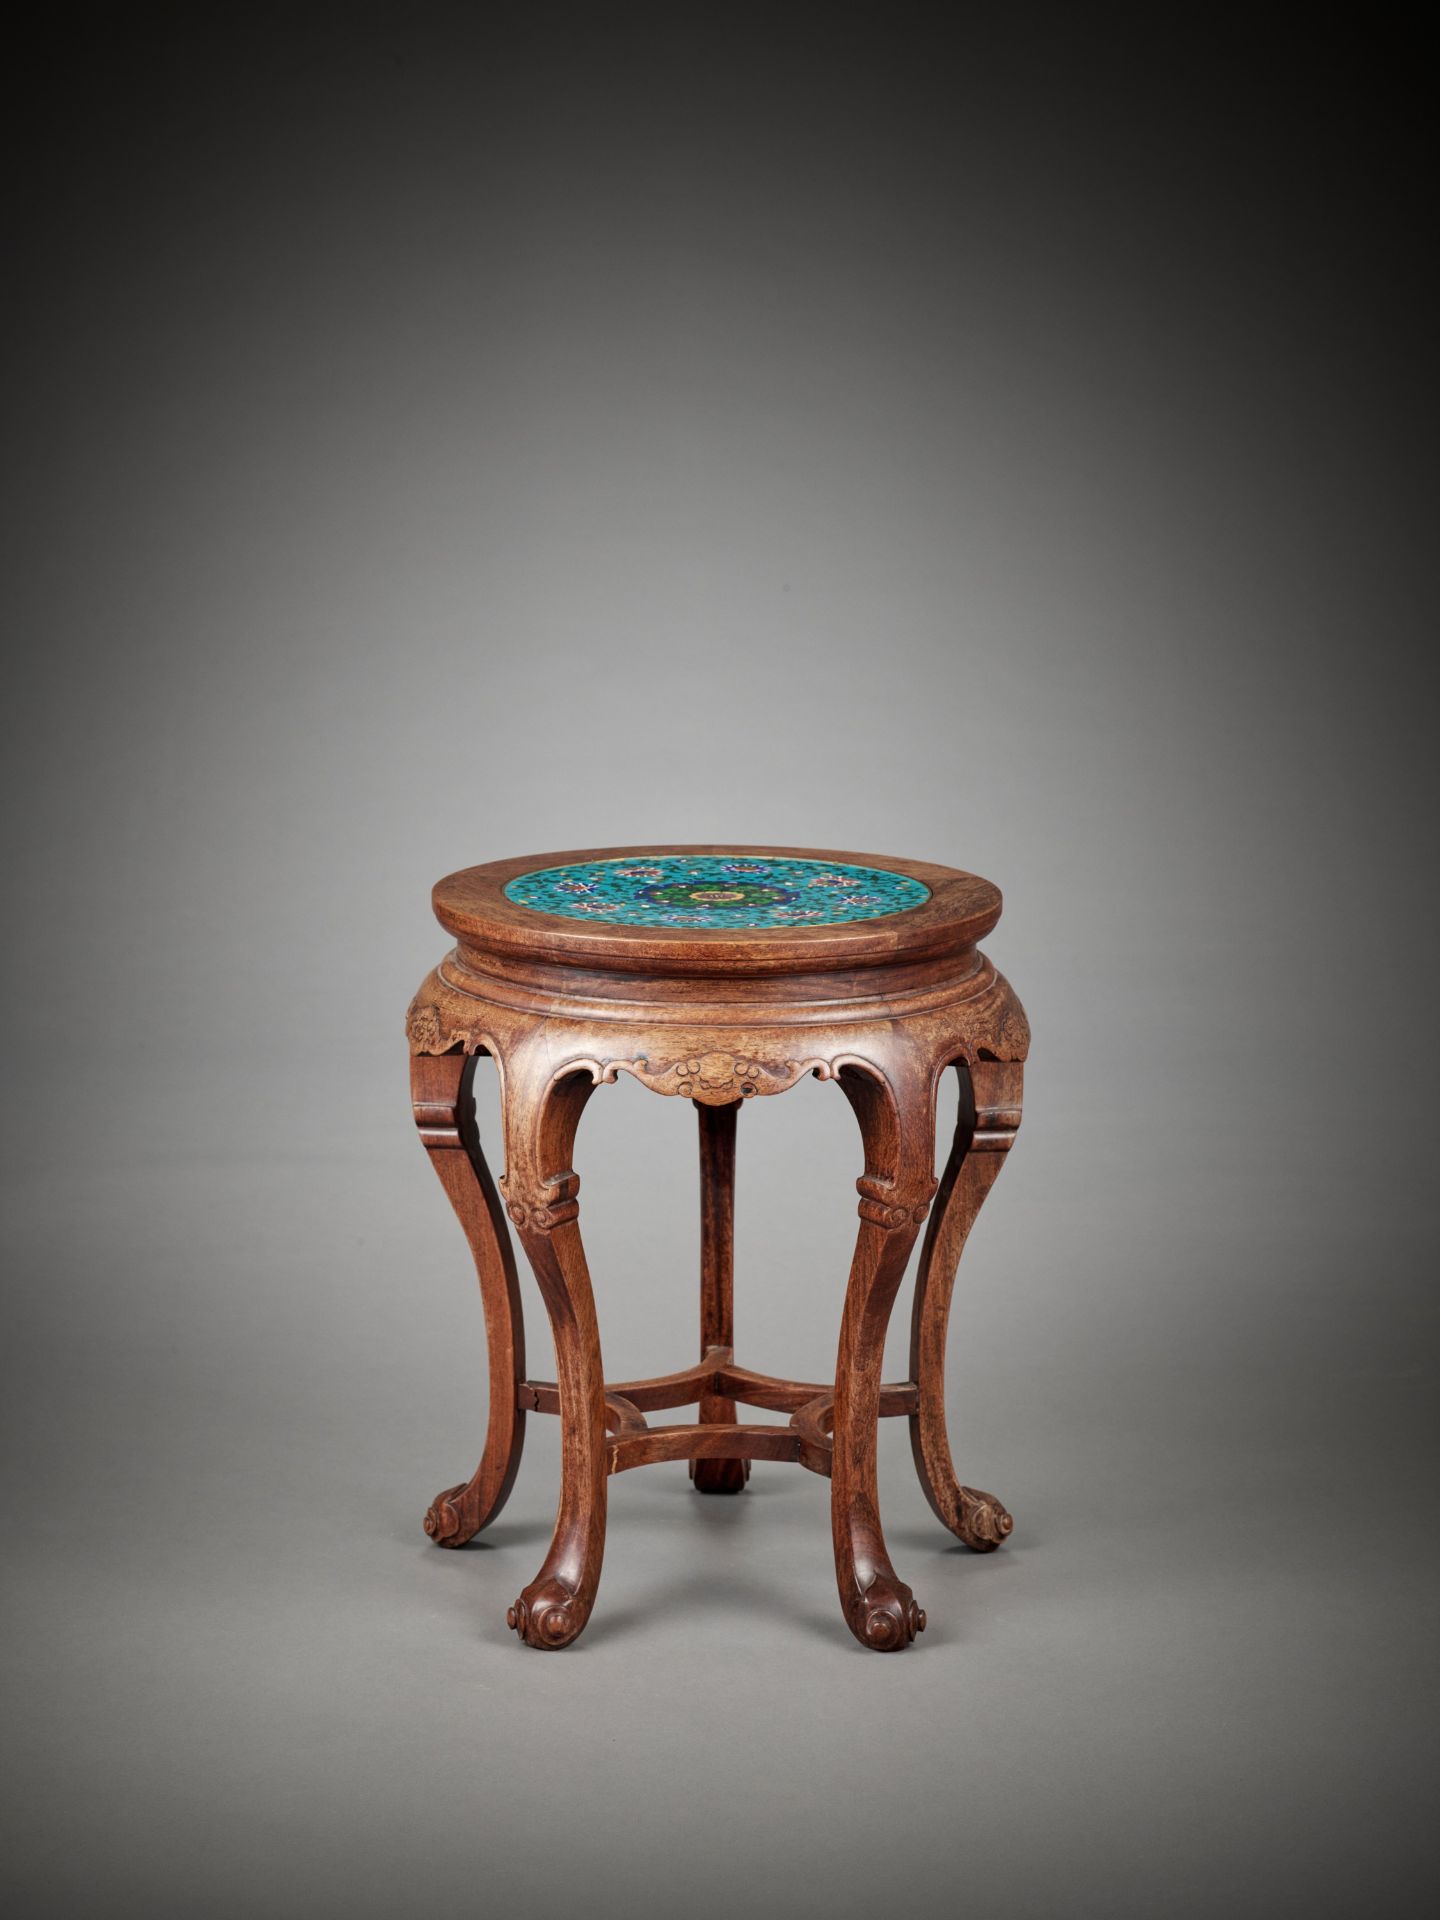 A CLOISONNE ENAMEL-INSET HARDWOOD STAND, LATE QING TO REPUBLIC - Image 7 of 8